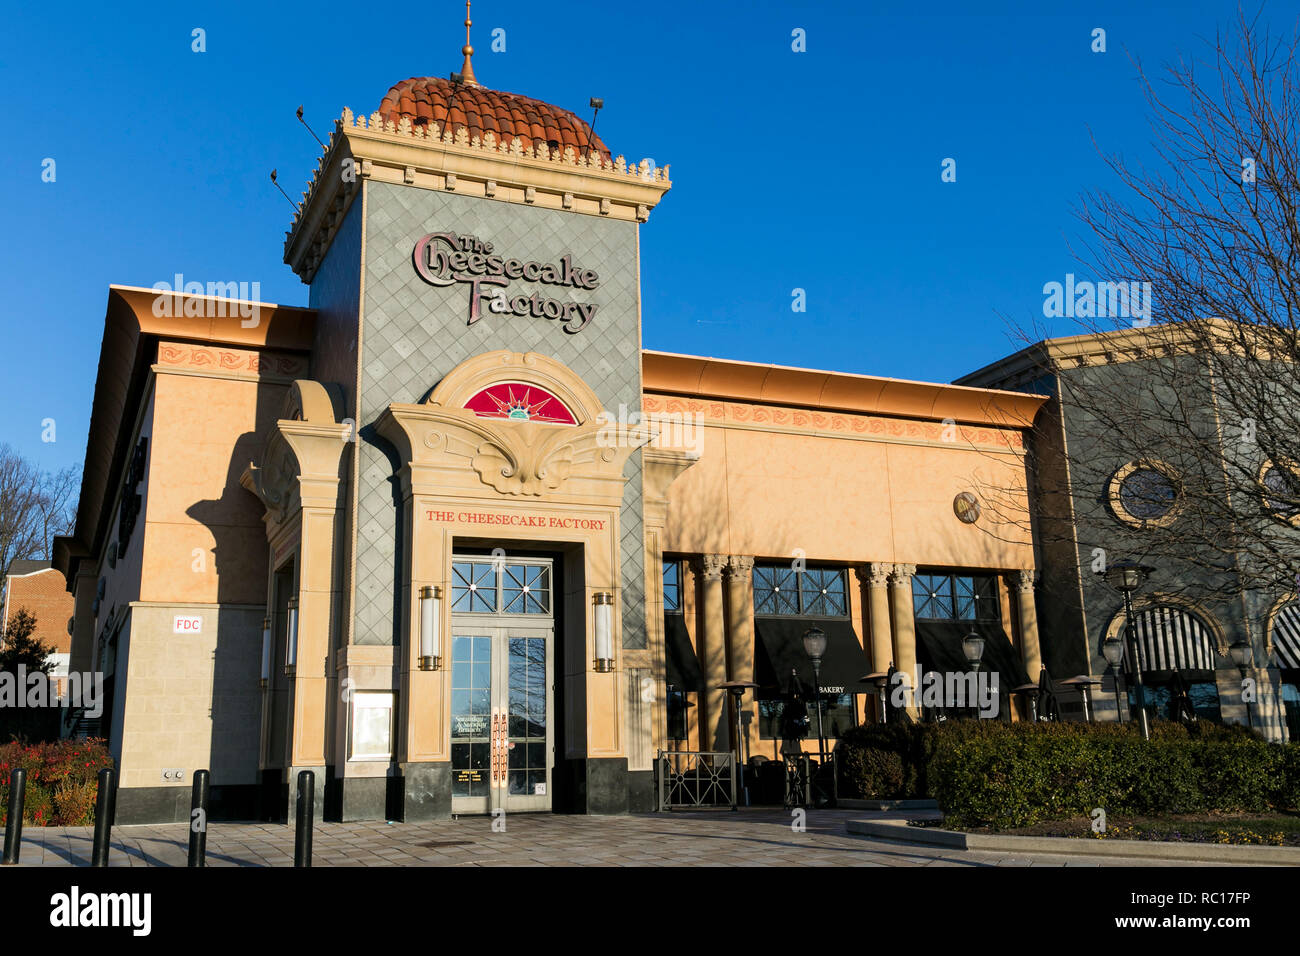 Cheesecake Factory Stock Photos Cheesecake Factory Stock Images